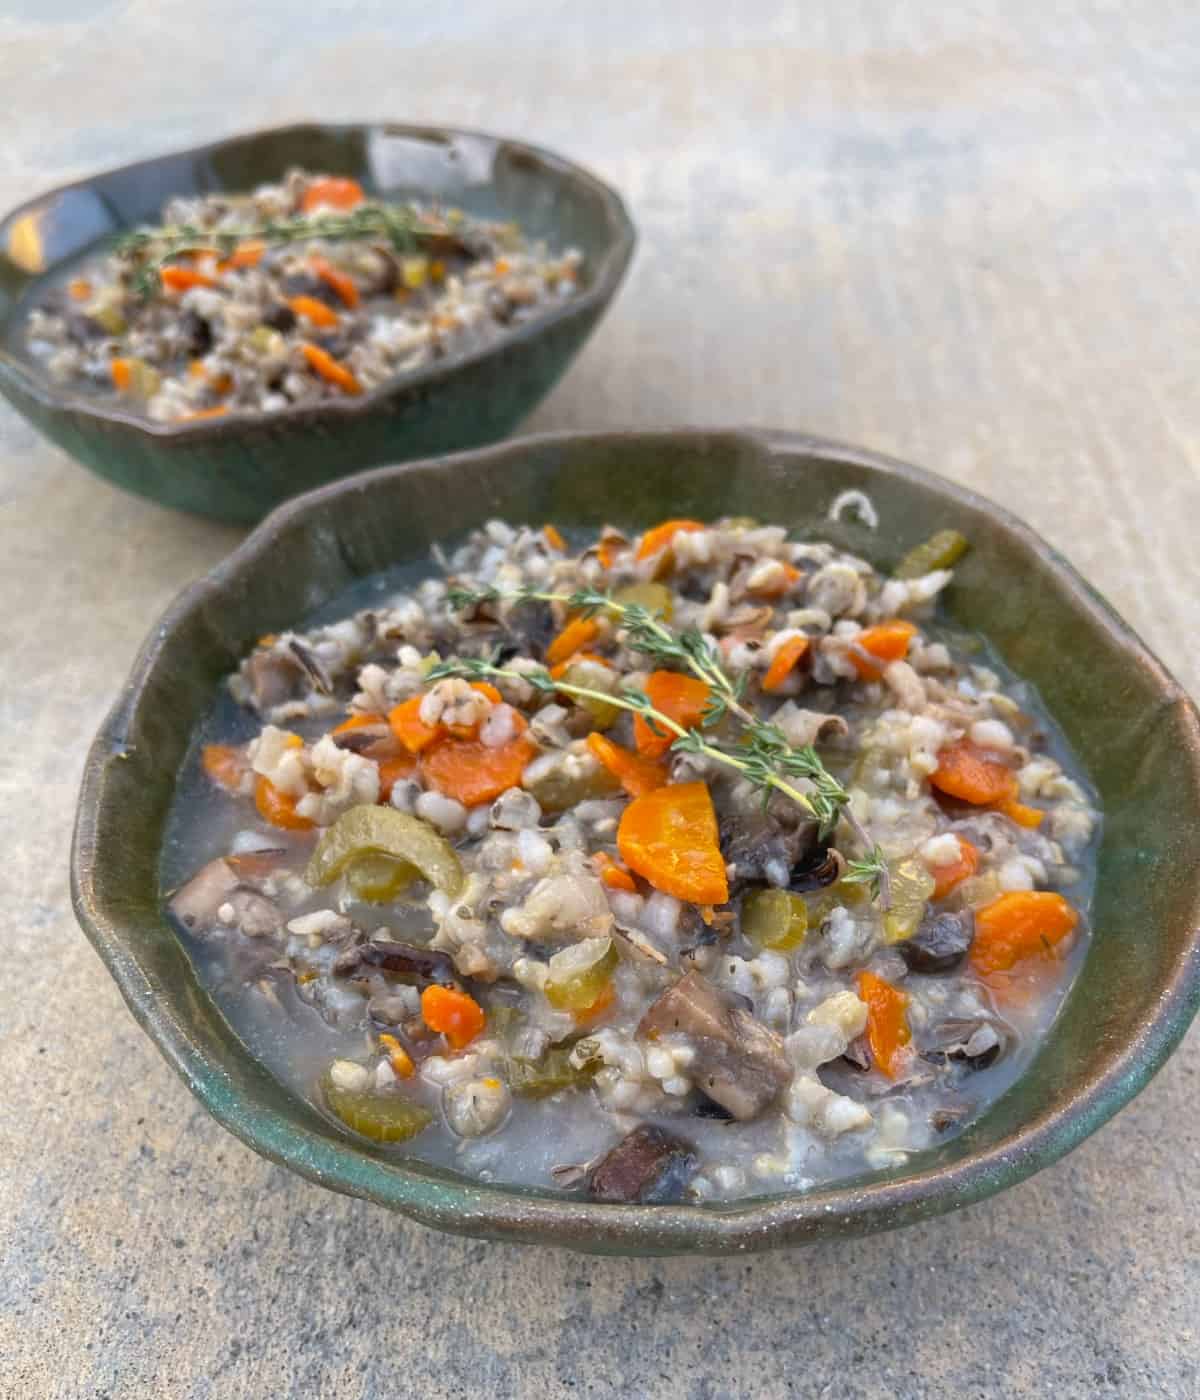 Instant Pot Wild Rice and Vegetable Stew in two green ceramic bowls garnished with sprigs of fresh thyme.